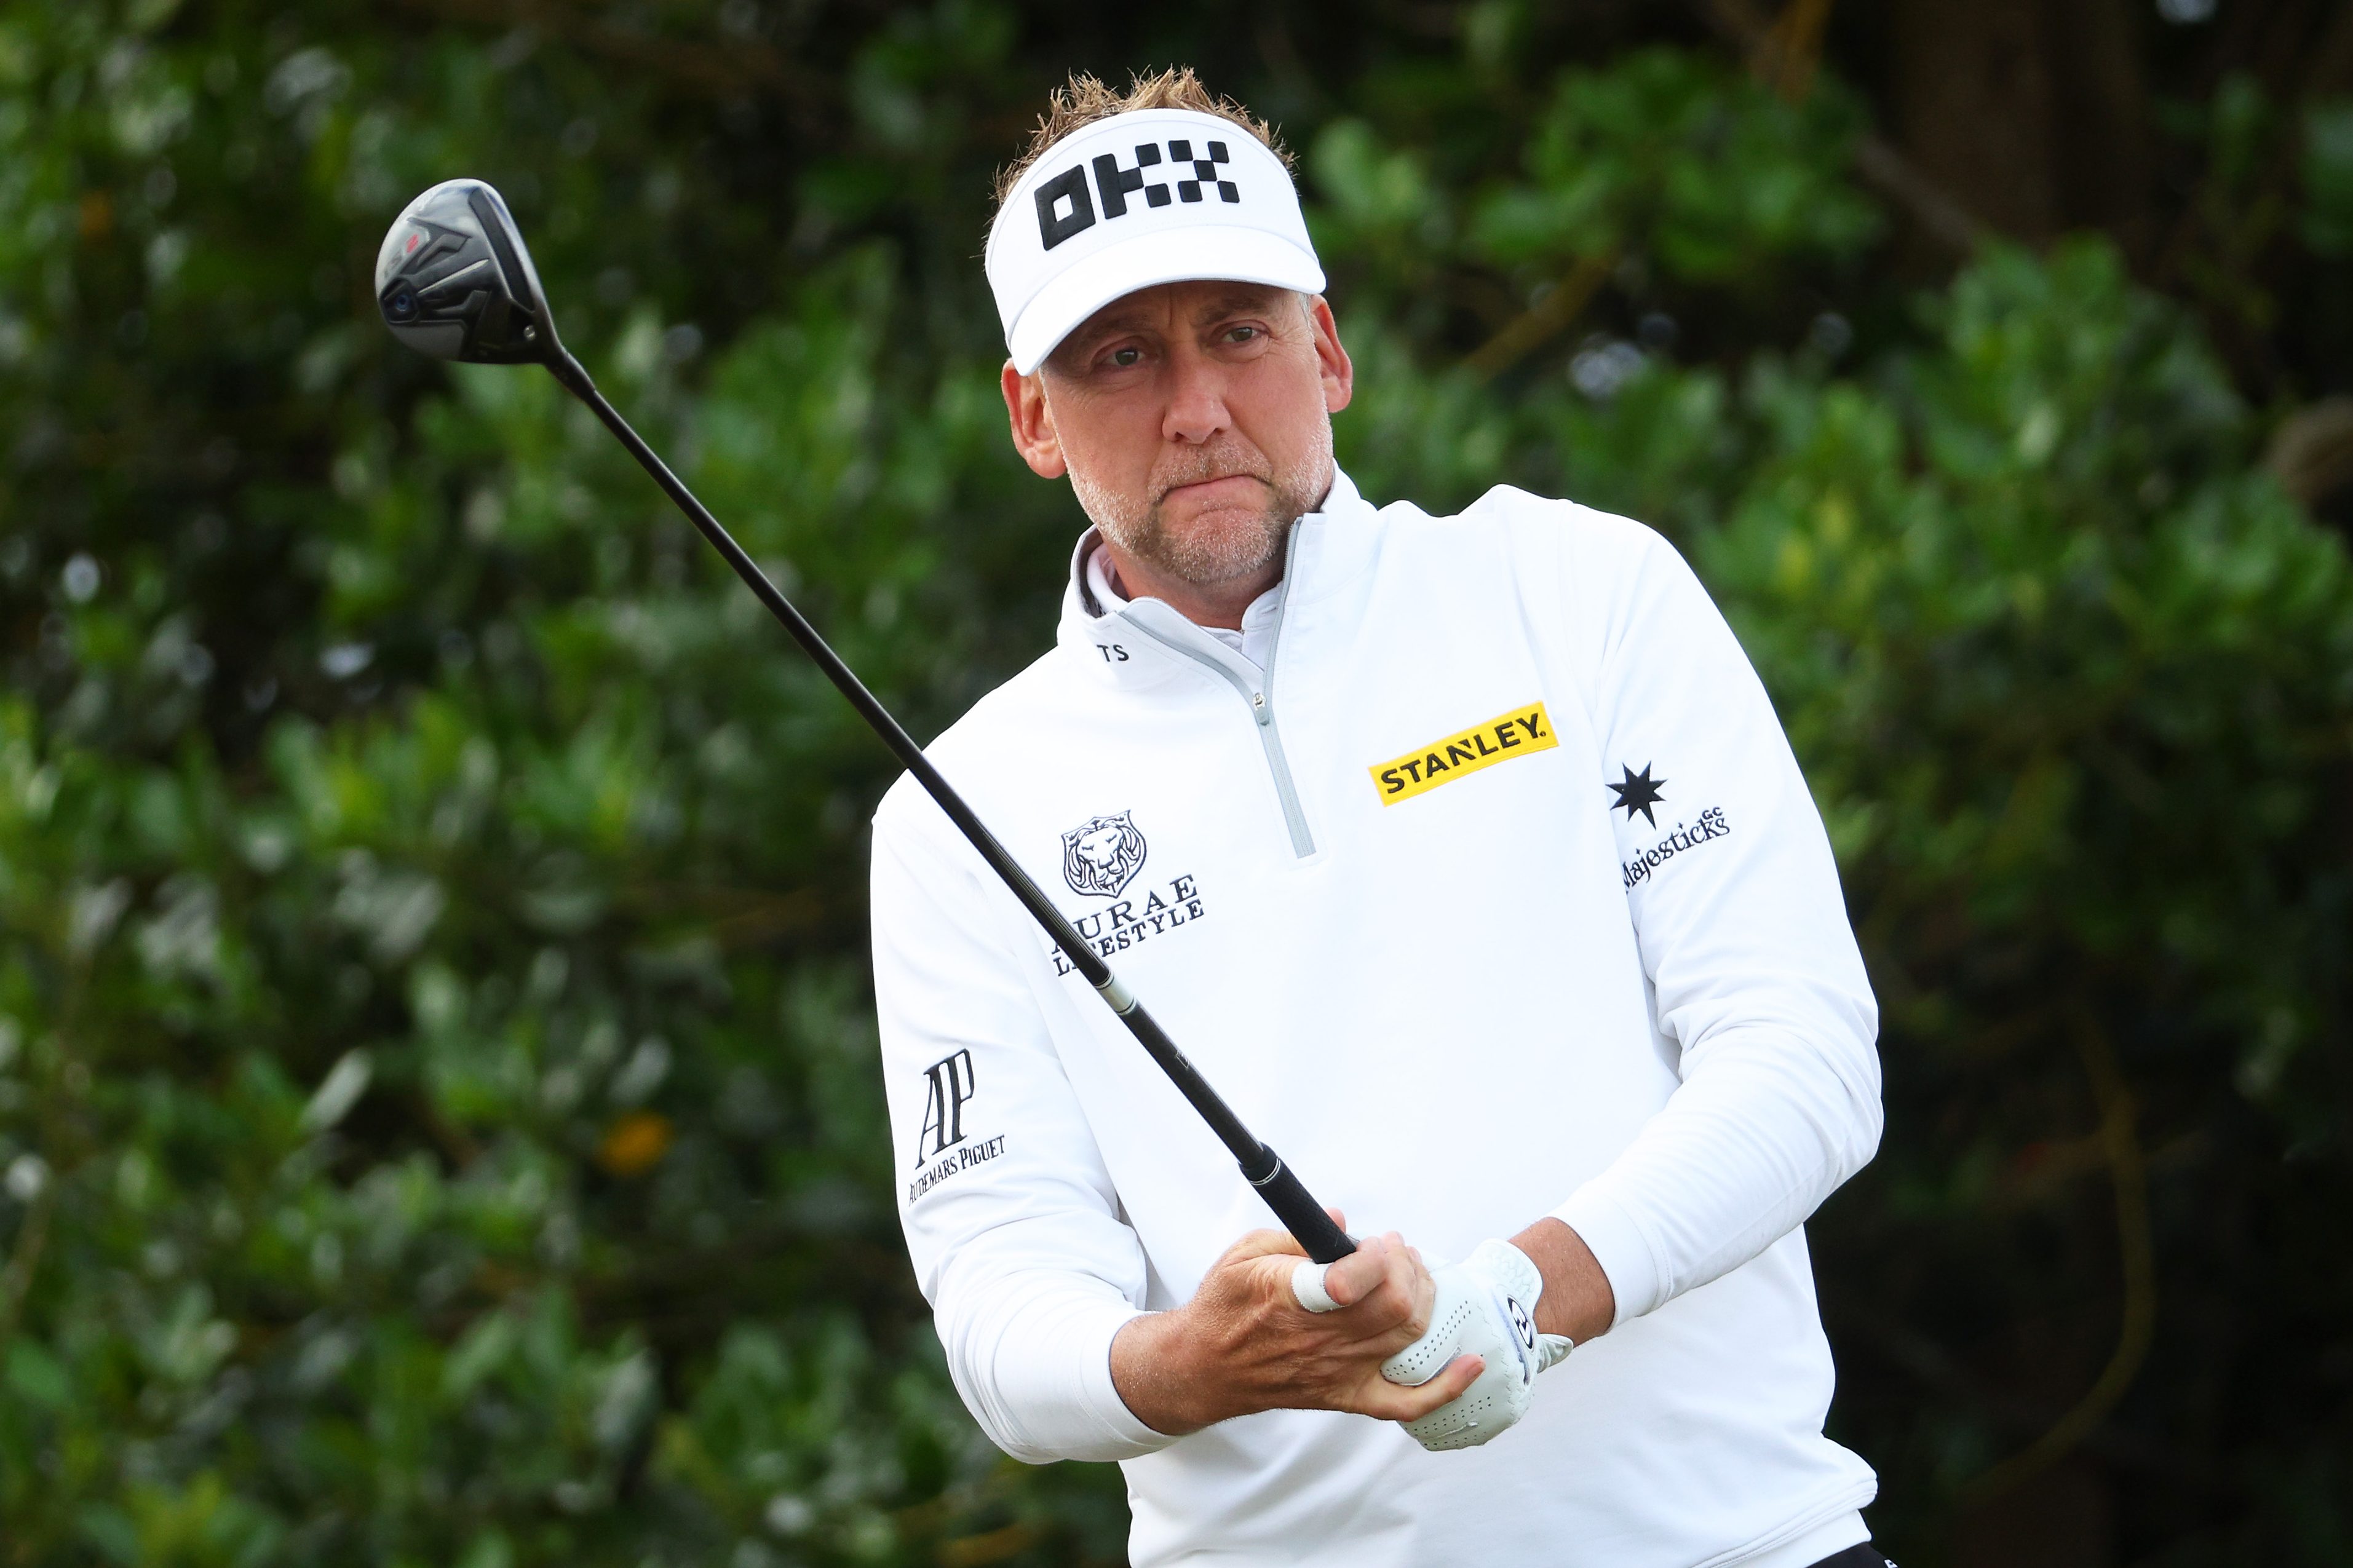 British Open May Ban LIV Golfers as Defector Ian Poulter Booed